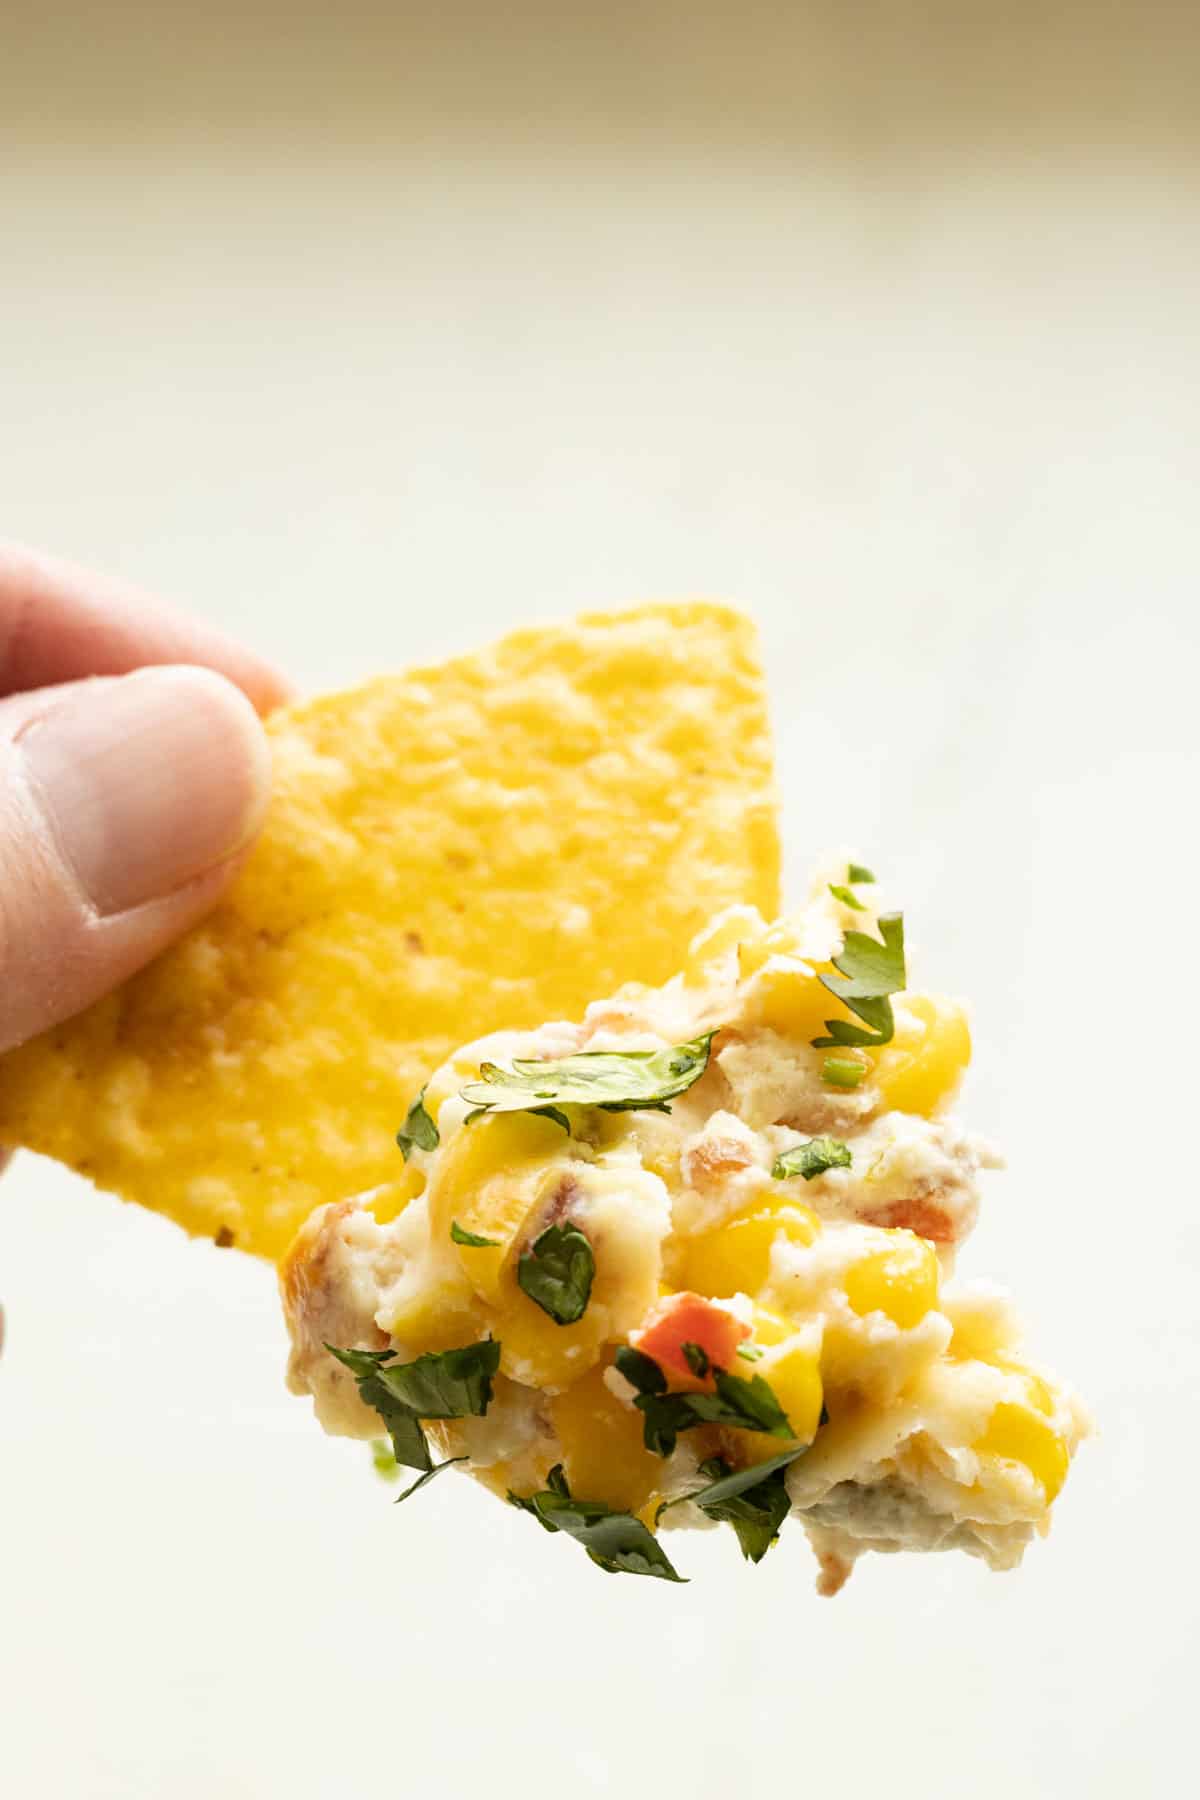 A tortilla chip with corn dip on it.